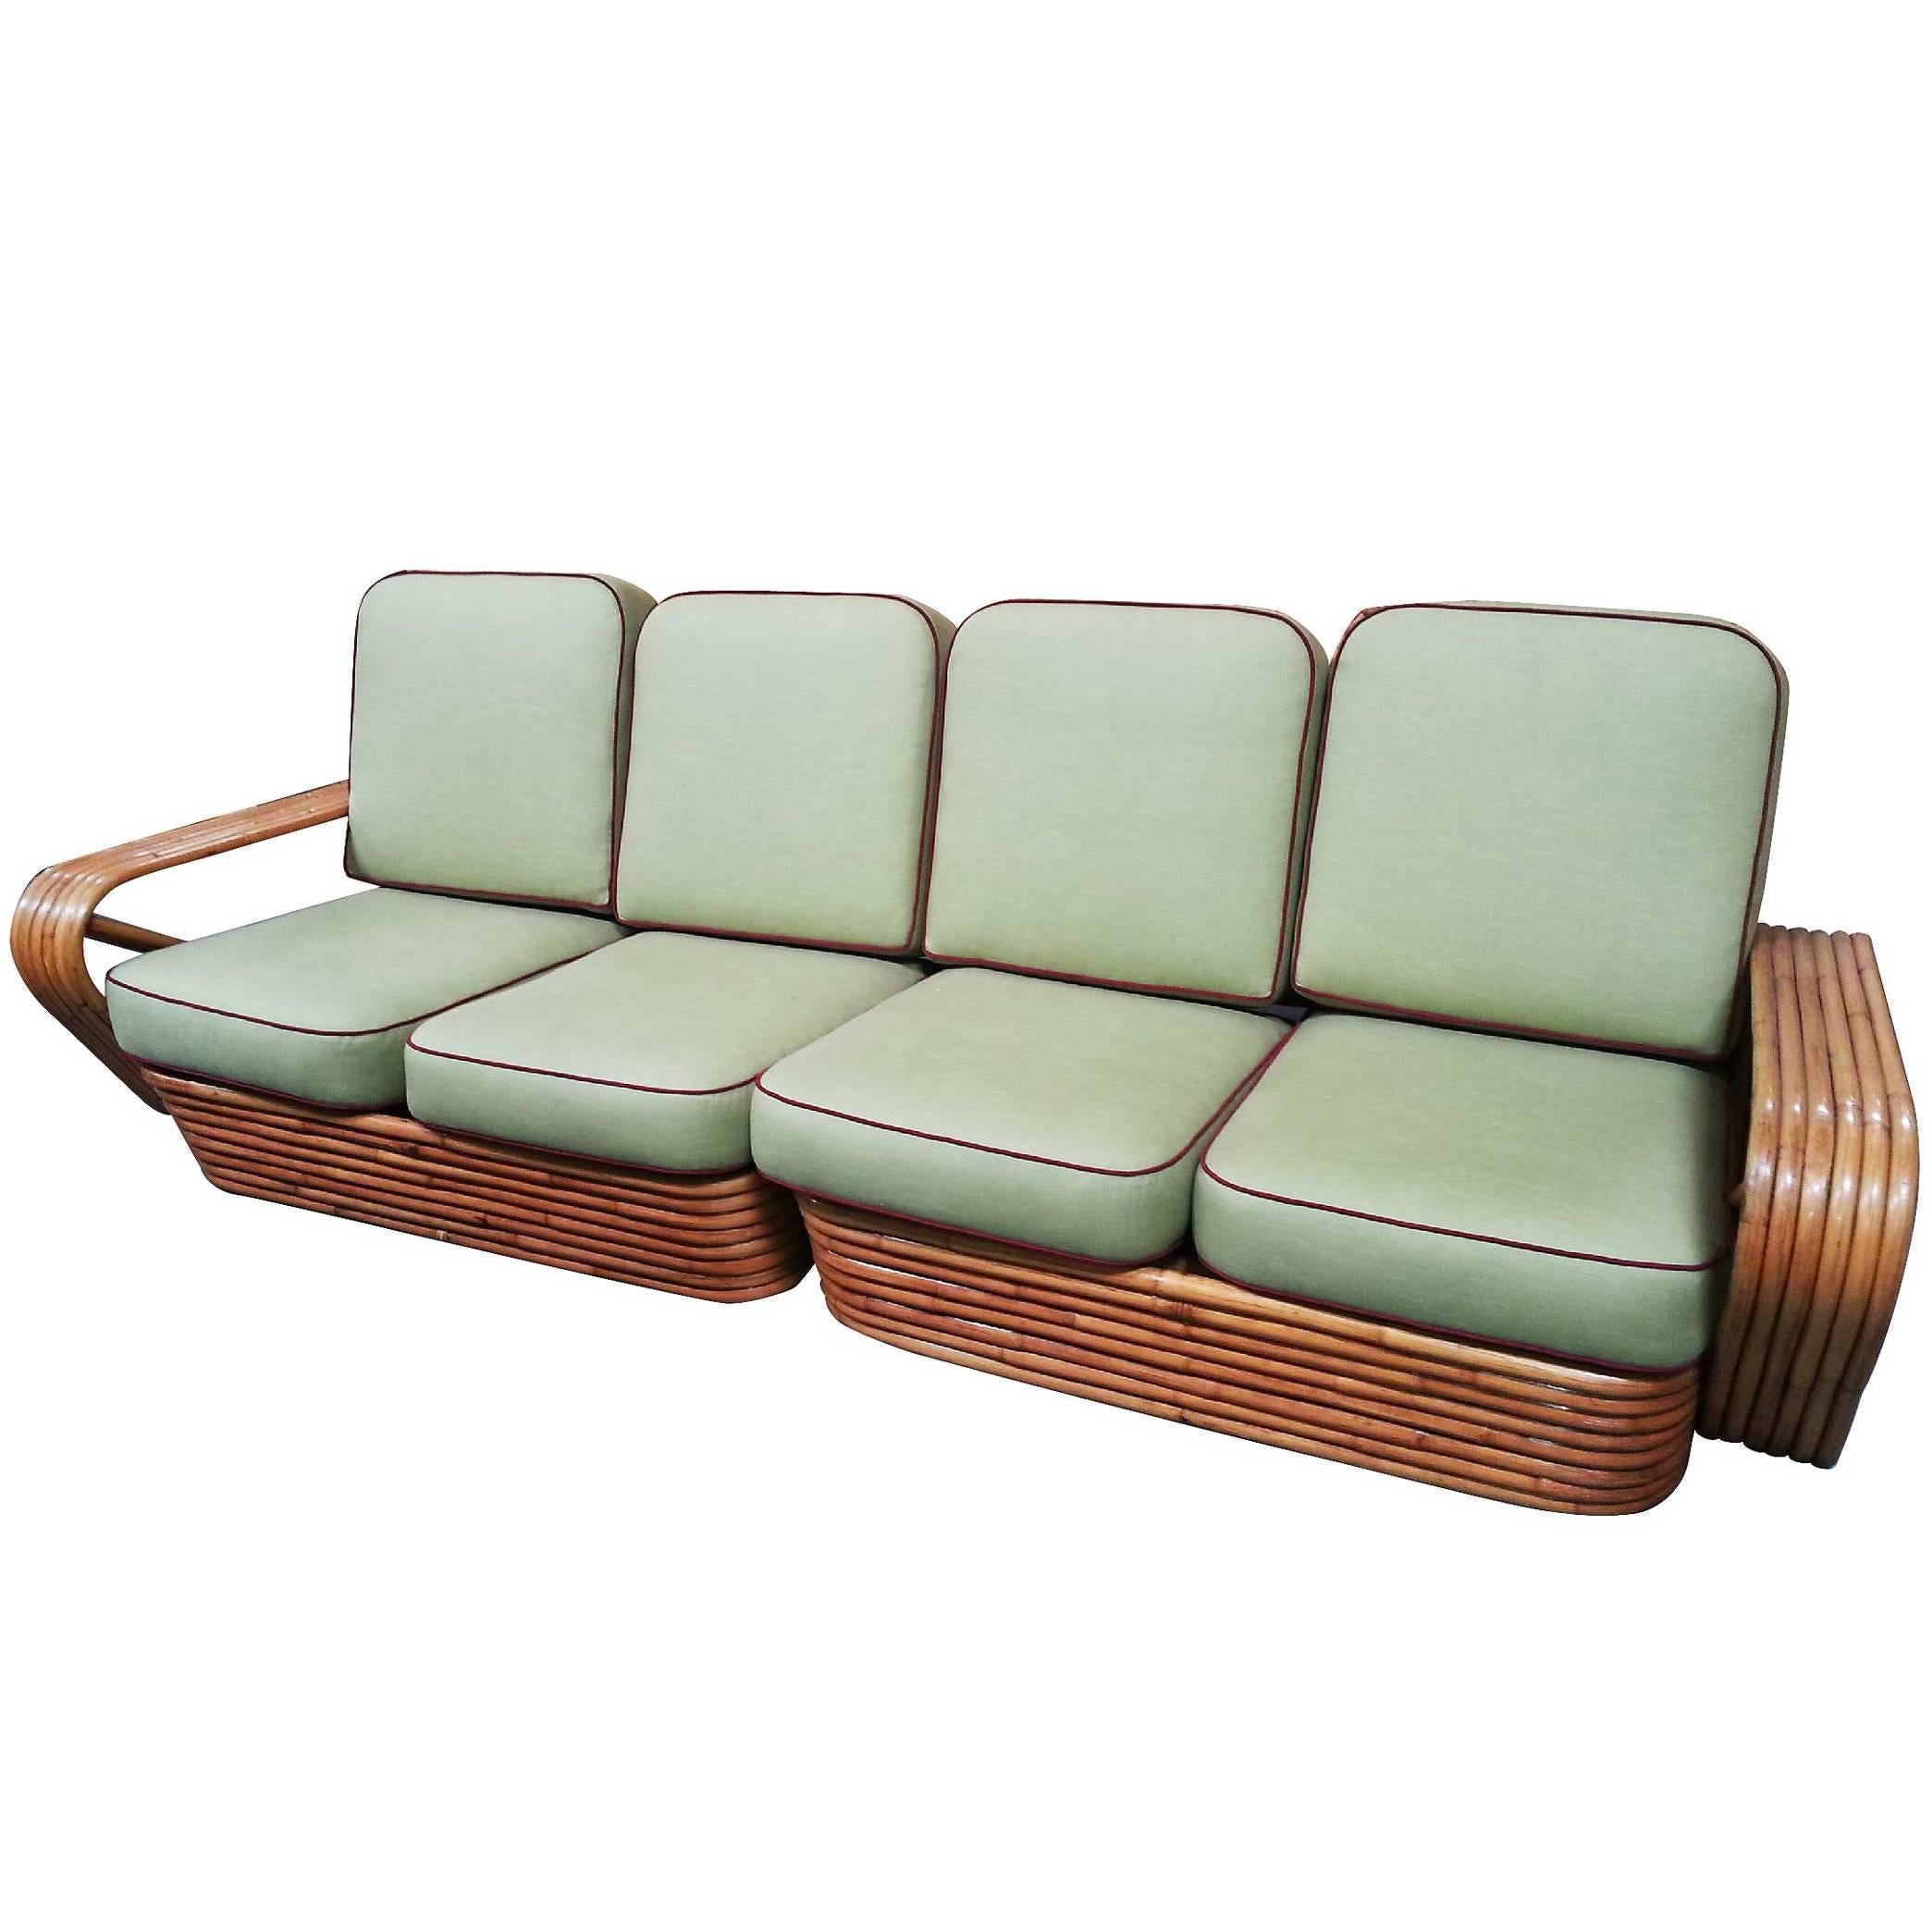 Restored Square Pretzel Rattan Four-Seat Two-Piece Sectional Sofa by Paul Frankl